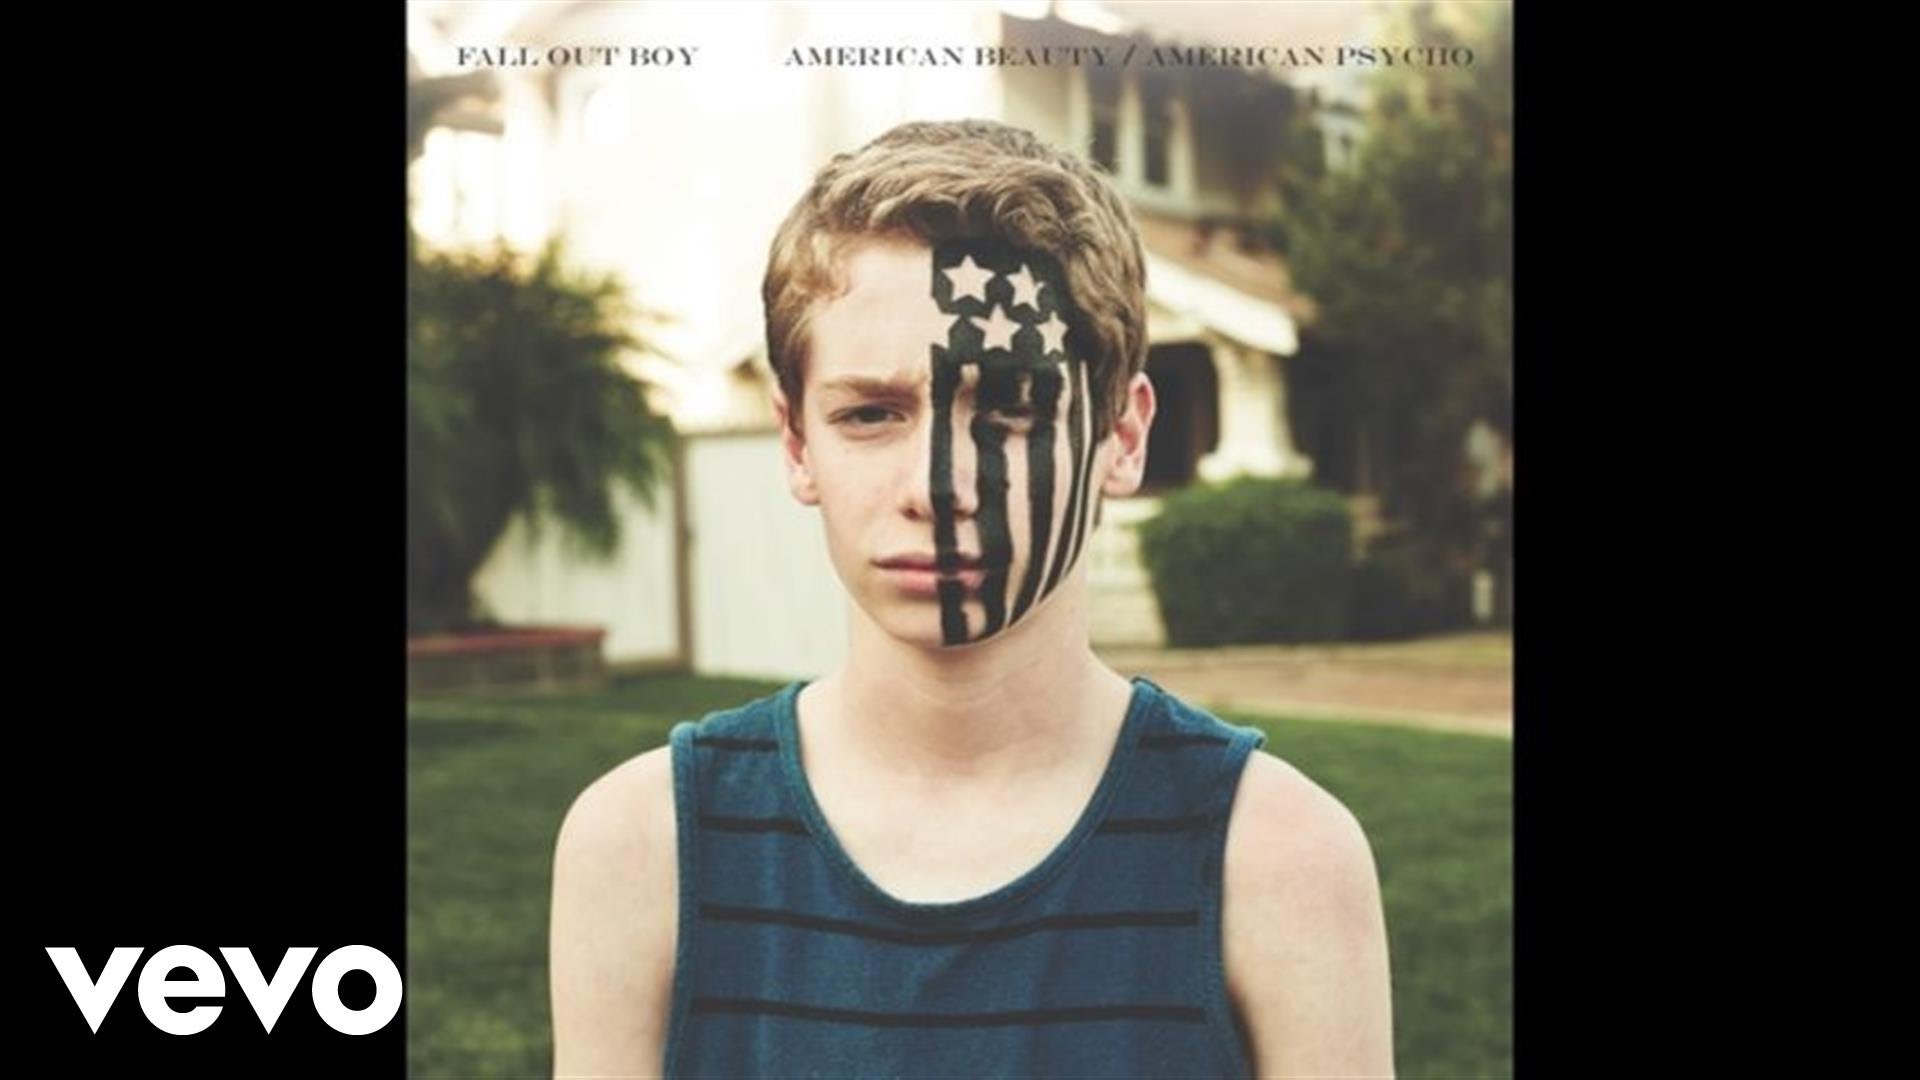 Centuries fall out. Fall out boy American Beauty/American Psycho. Fall out boy альбом American Beauty/American Psycho. Fall out boy 2022. Irresistible Fall out boy обложка.